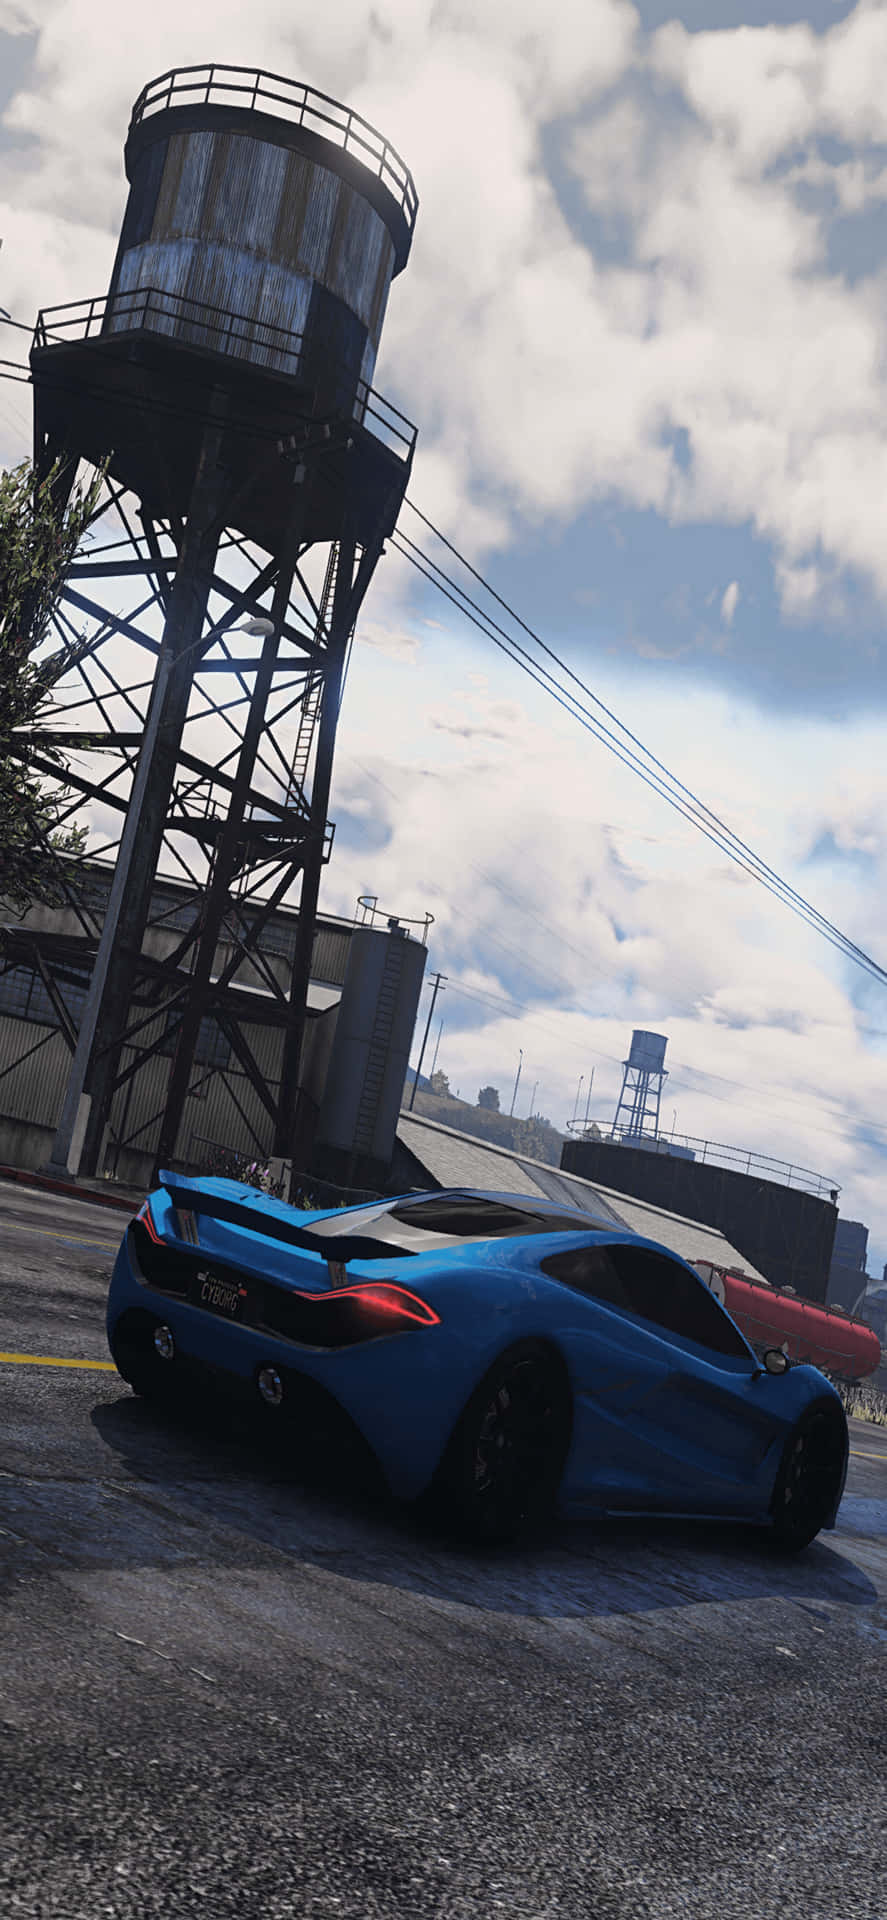 Iphone Xs Max Grand Theft Auto V Background Blue Sports Car